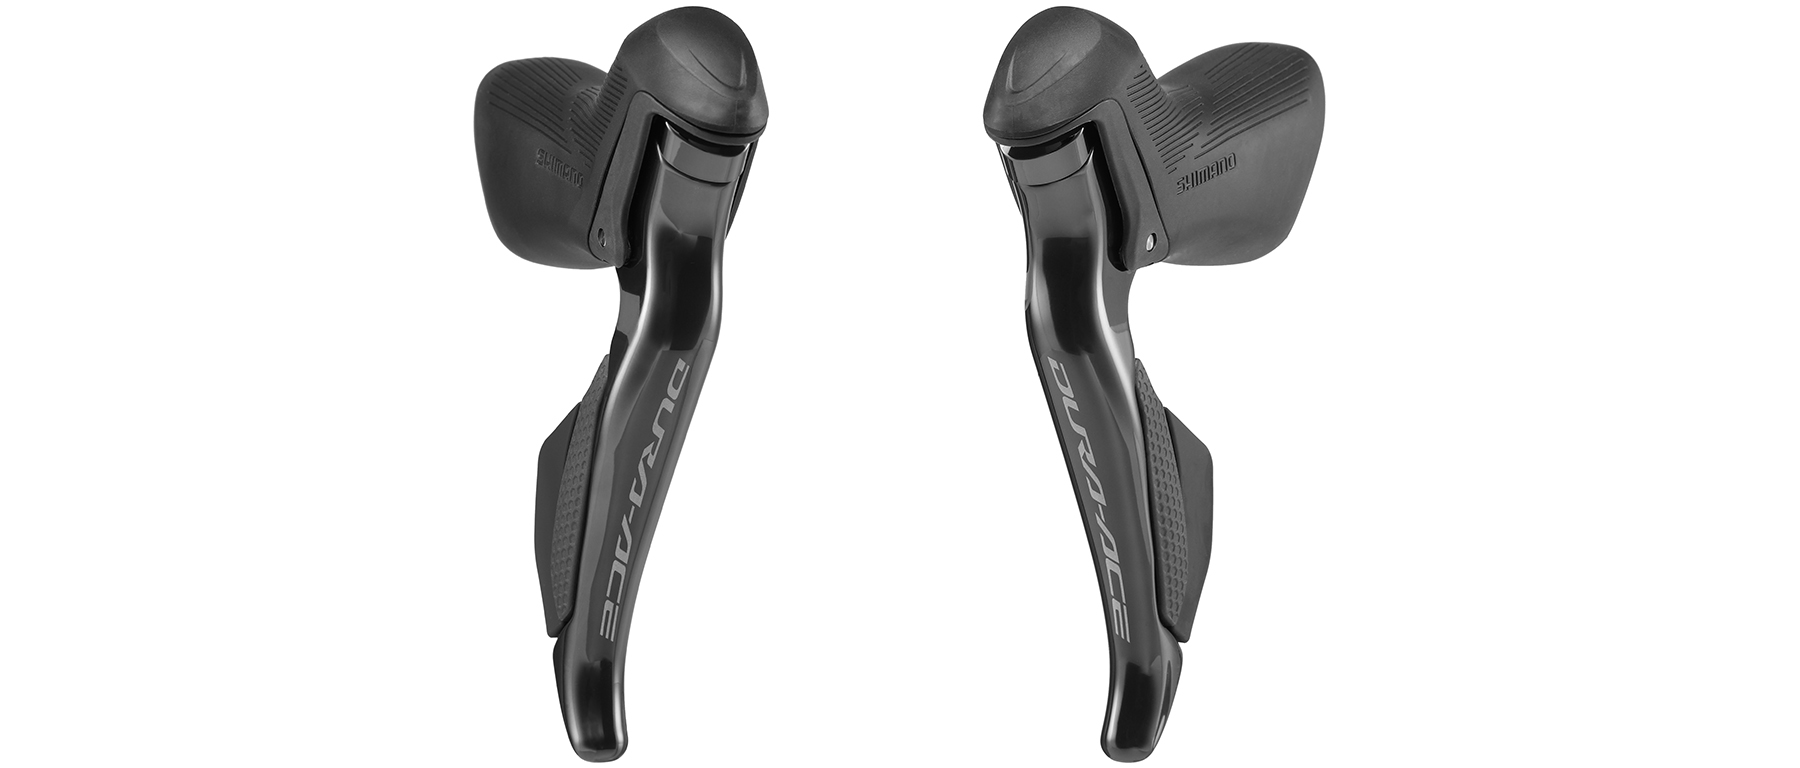 Shimano Dura-Ace ST-R9250 12-Speed Di2 Dual Control Levers